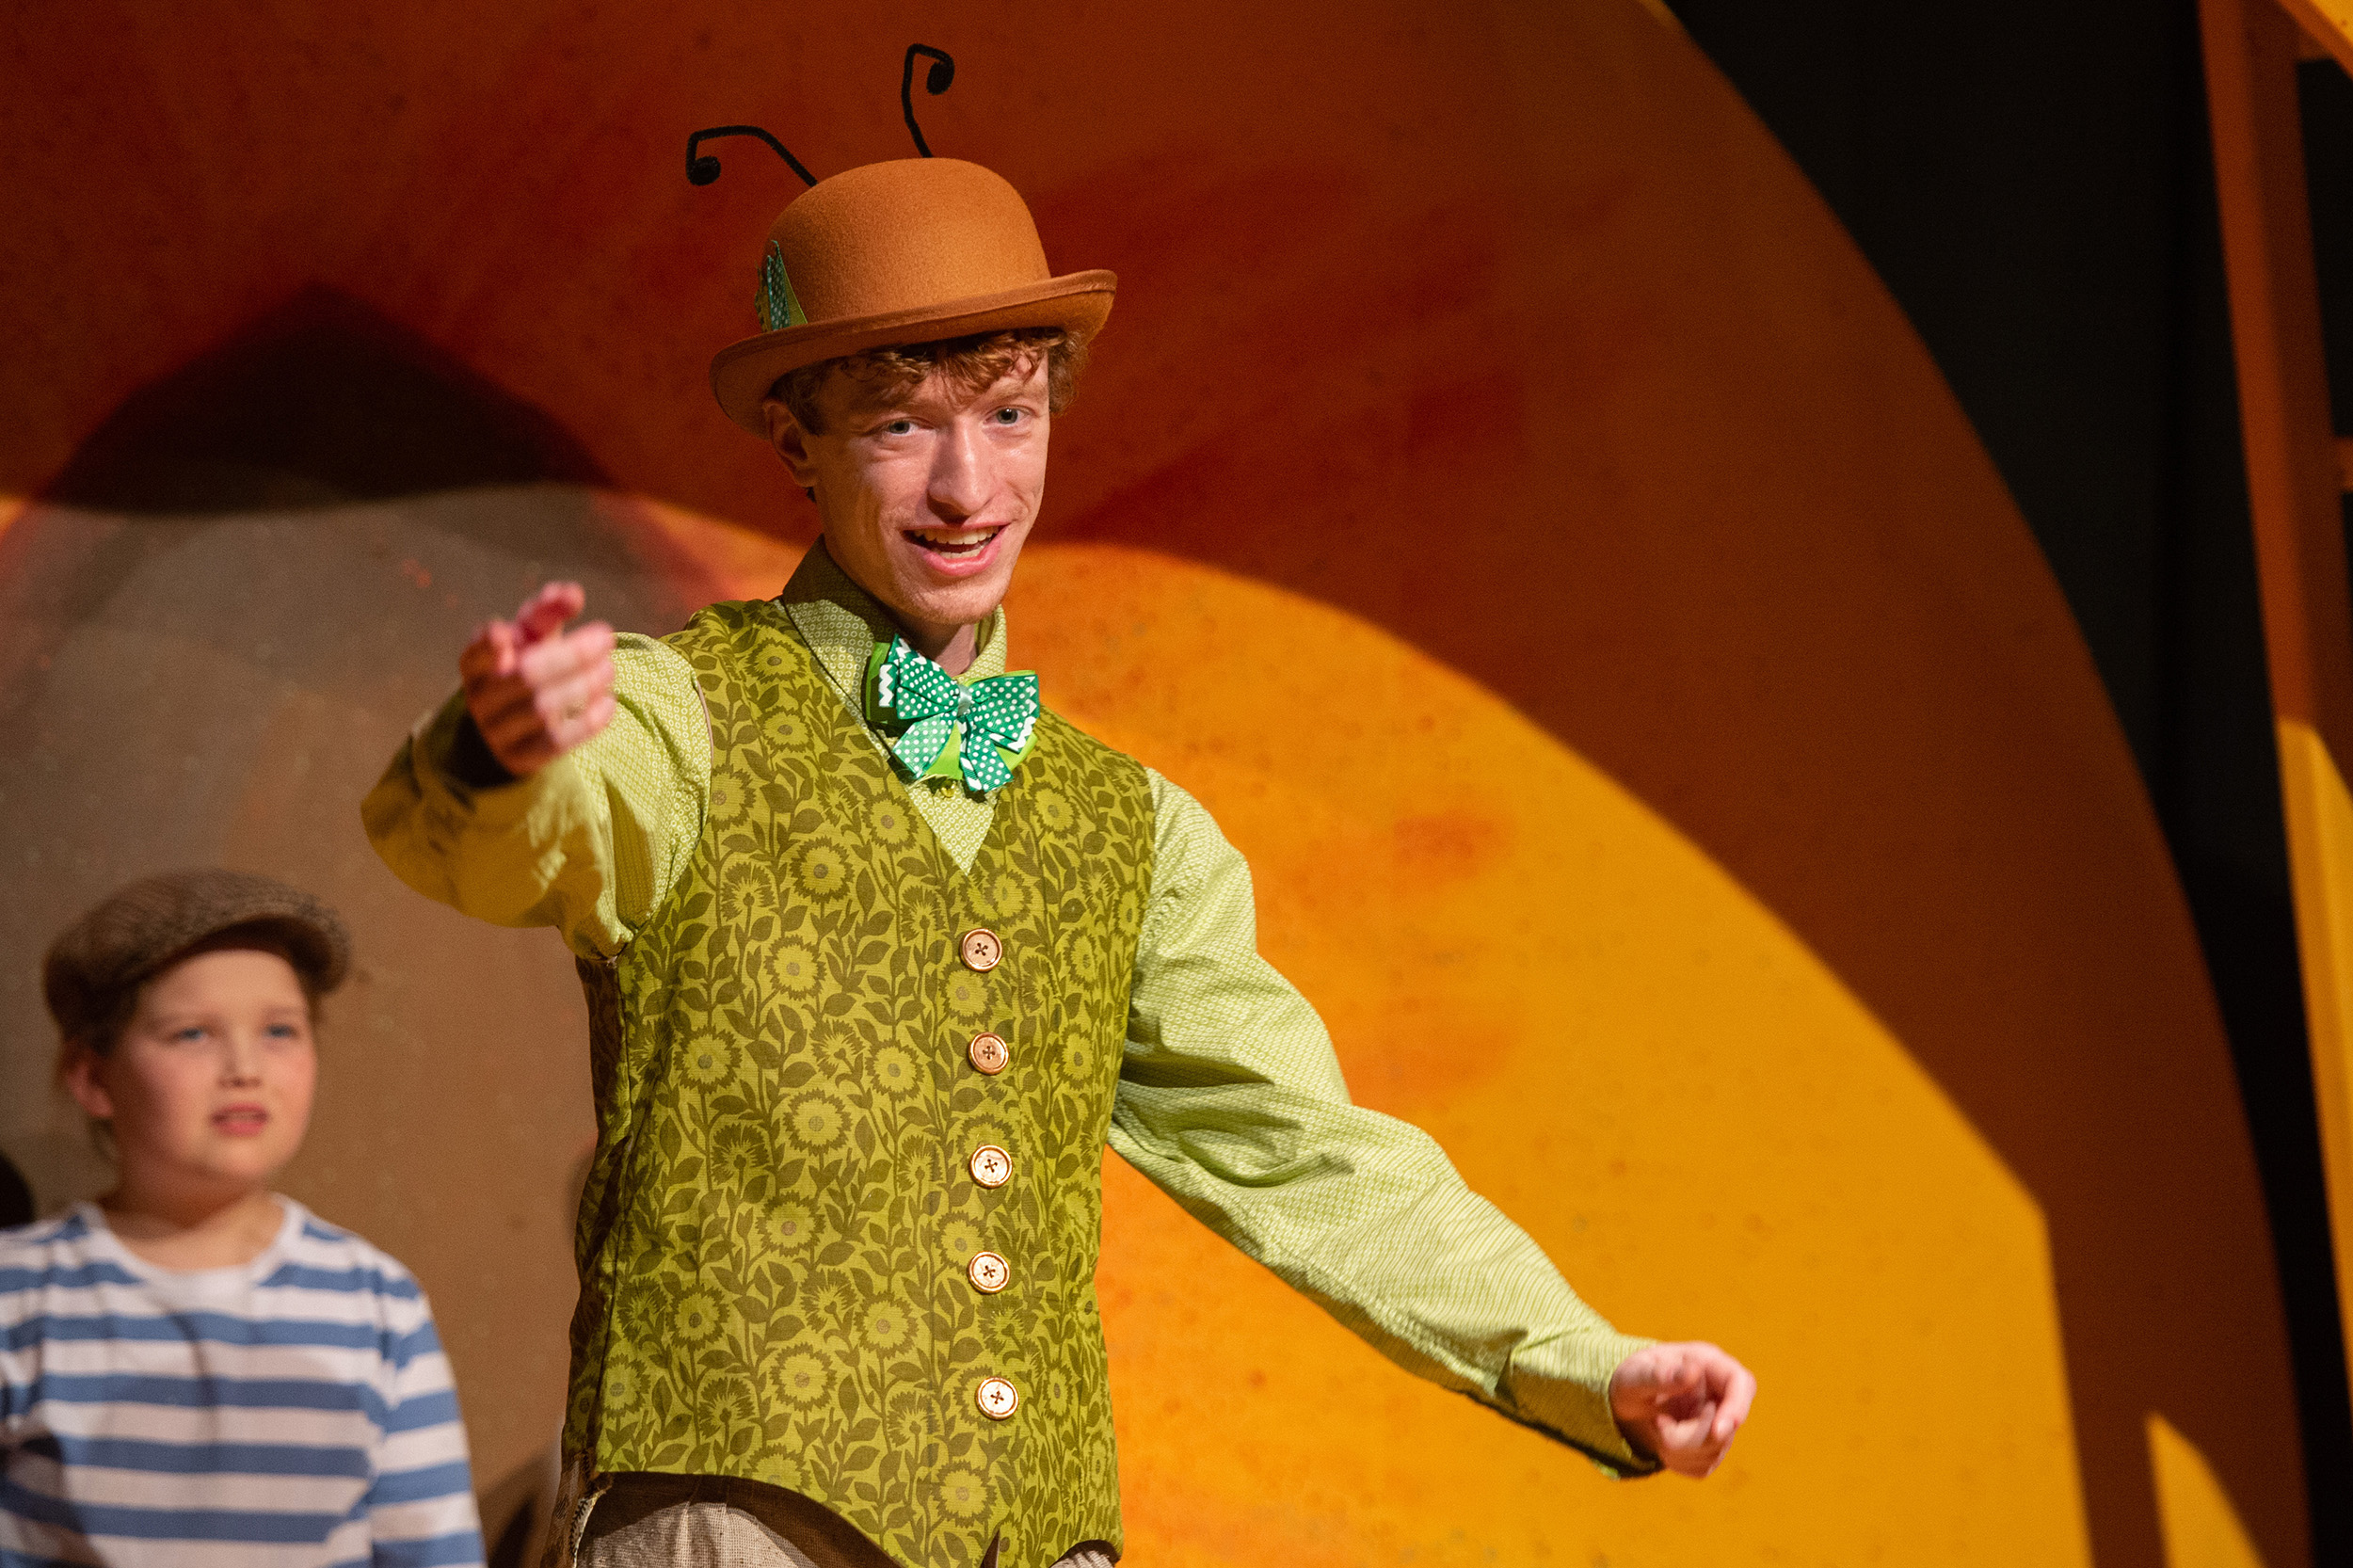 Production photo from Hesston College performance of James and the Giant Peach, spring 2022